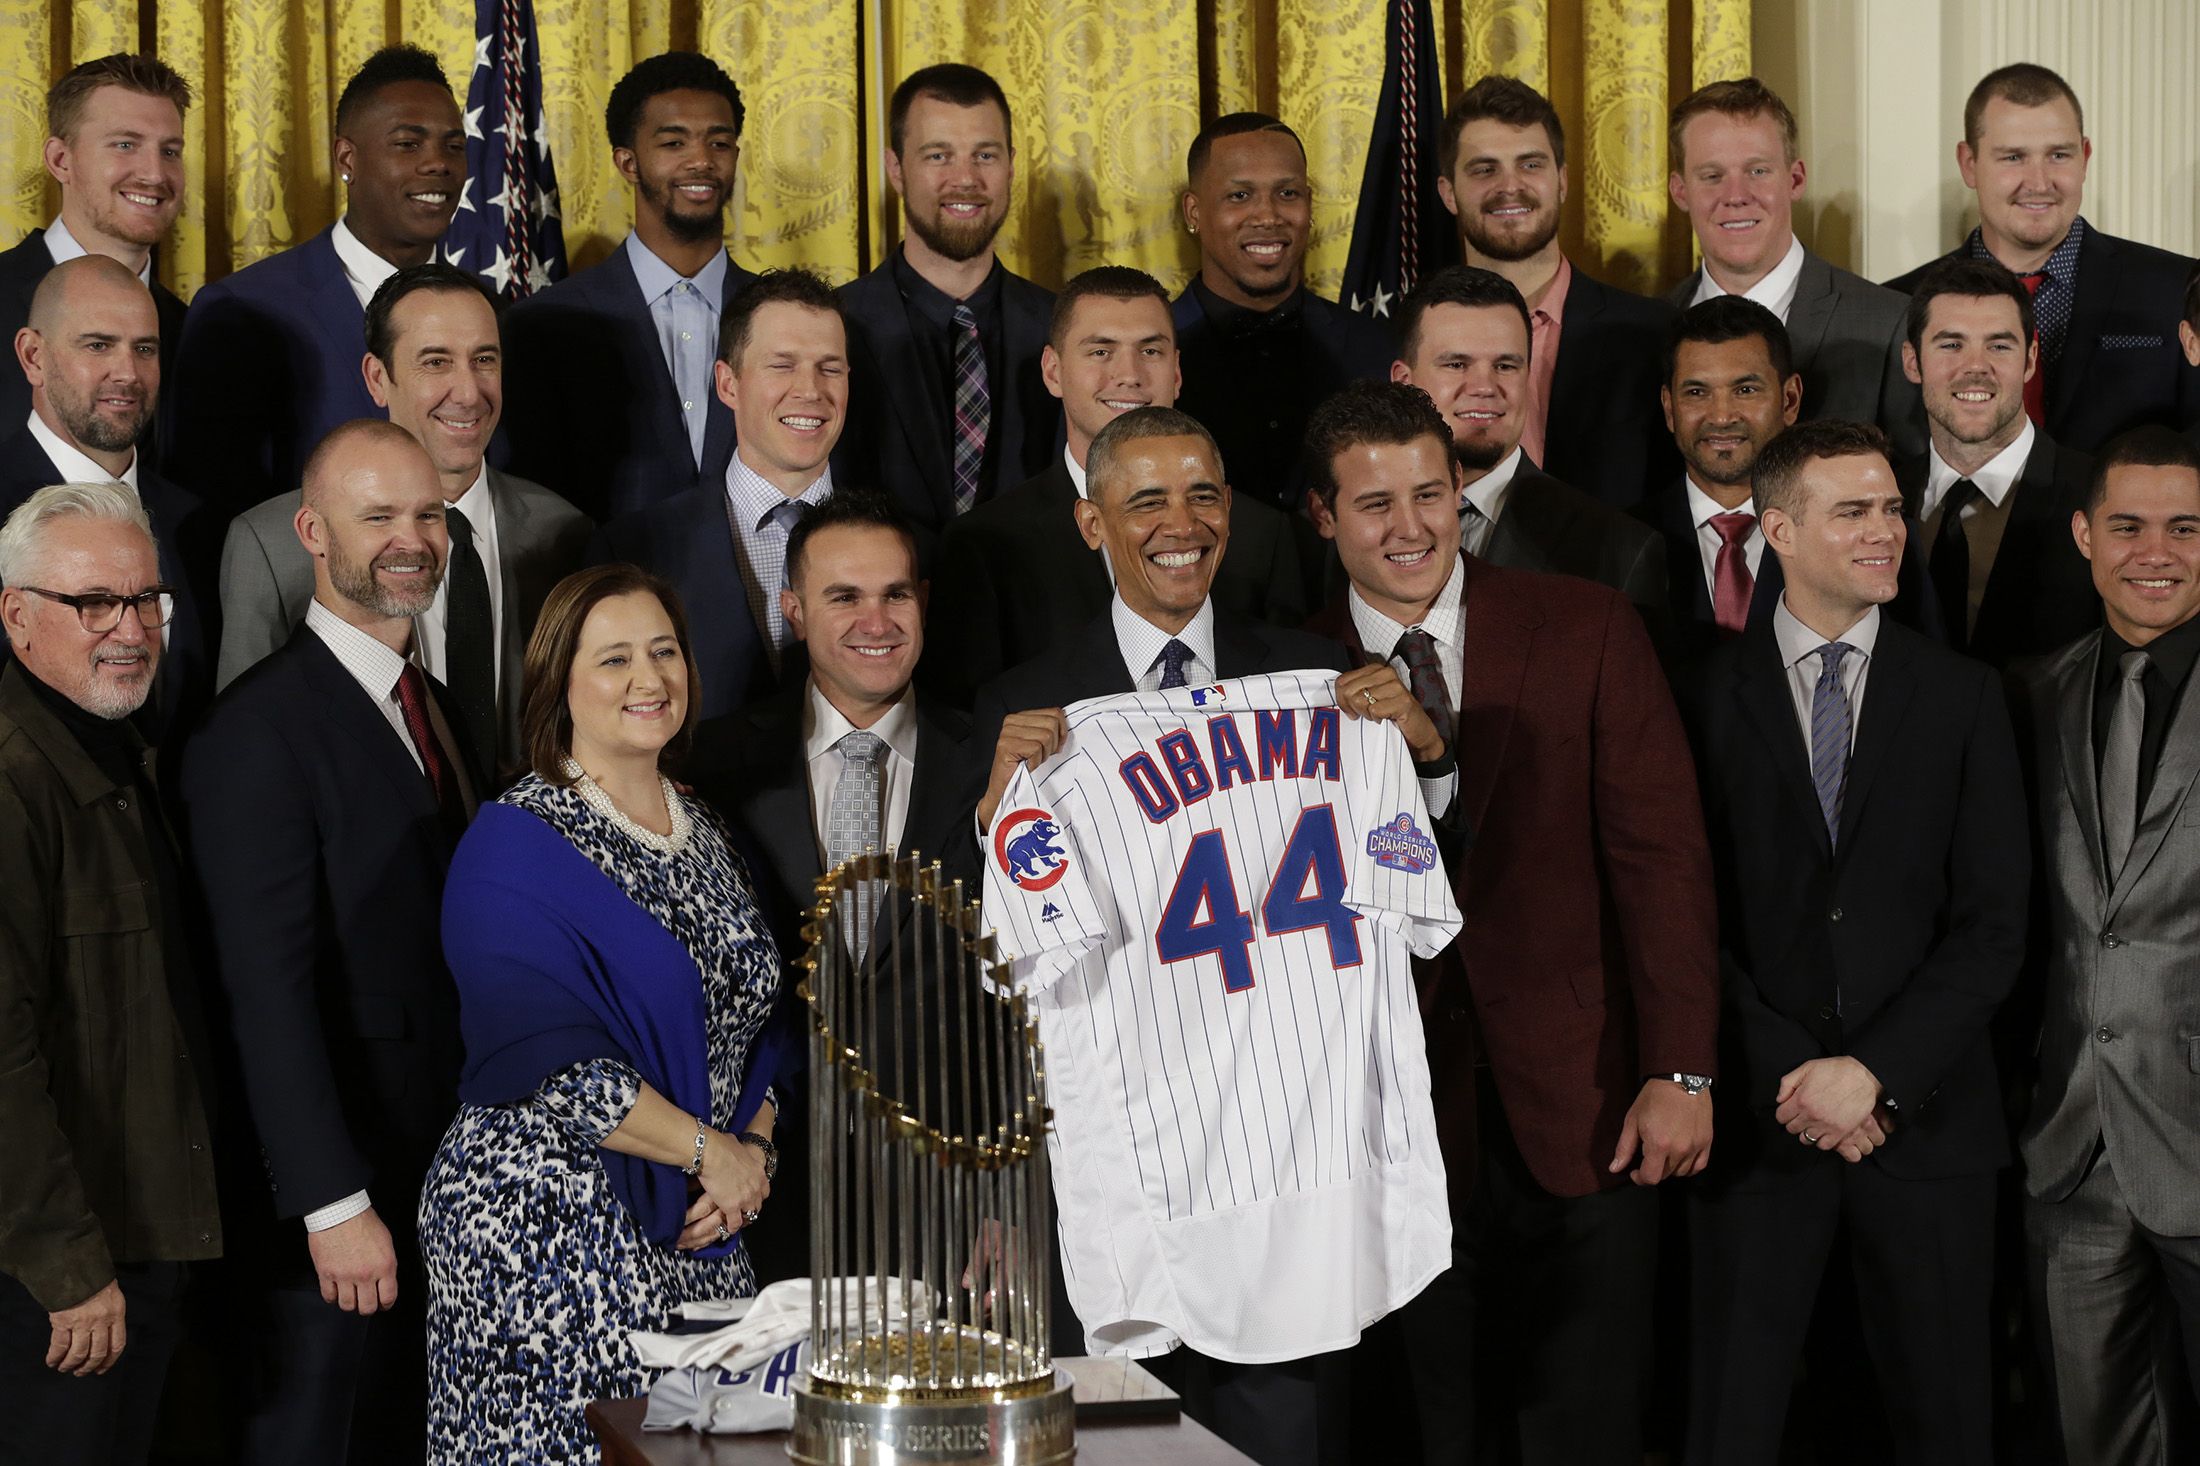 US President Barack Obama poses with presented jersey as he welcomes the World Champion Chicago Cubs baseball team to the White House in Washingto, DC on January 16, 2017.
